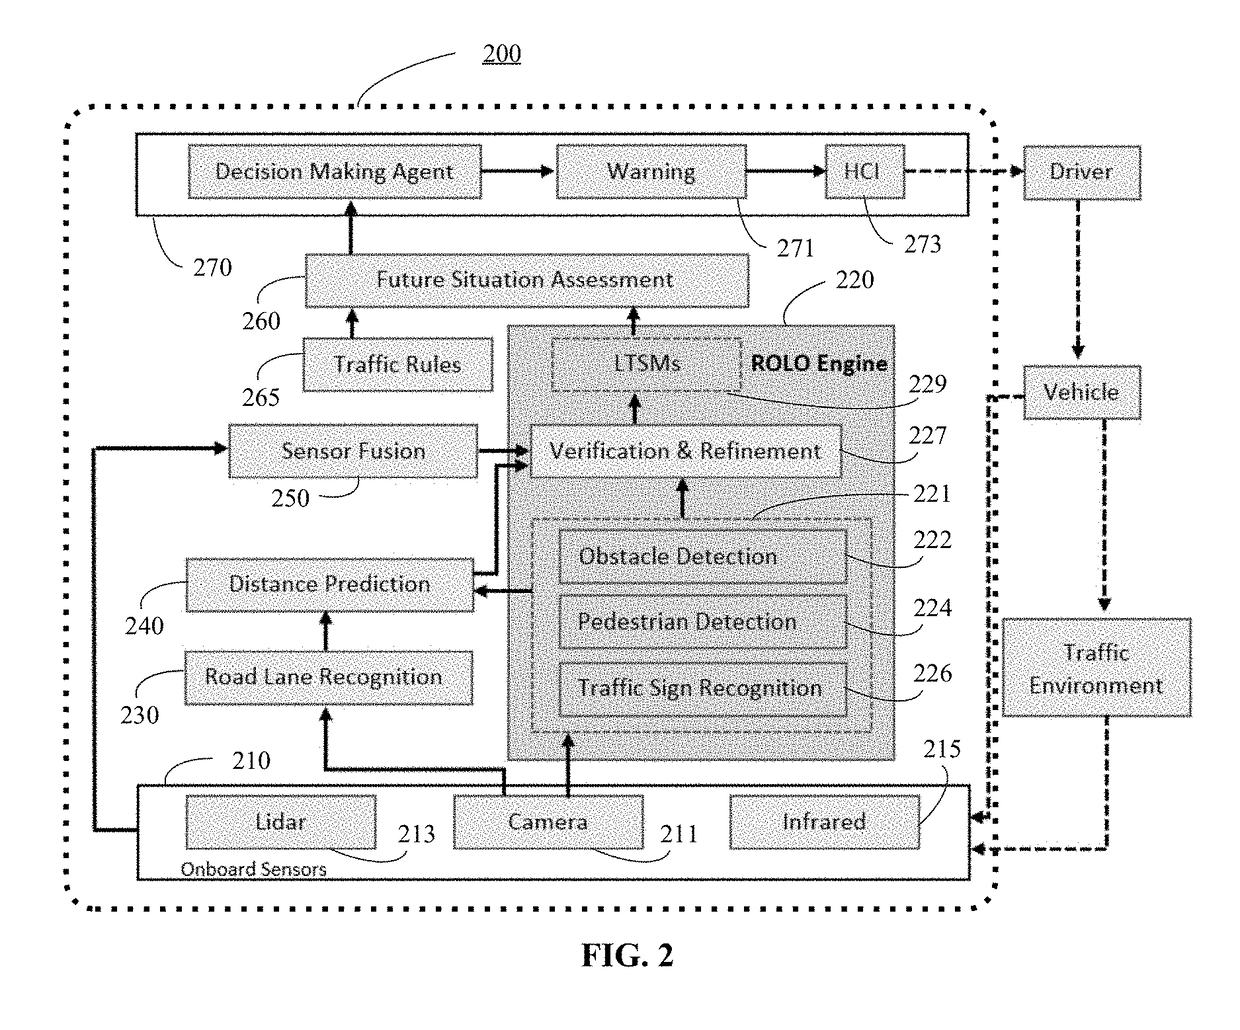 Method and system for vision-centric deep-learning-based road situation analysis